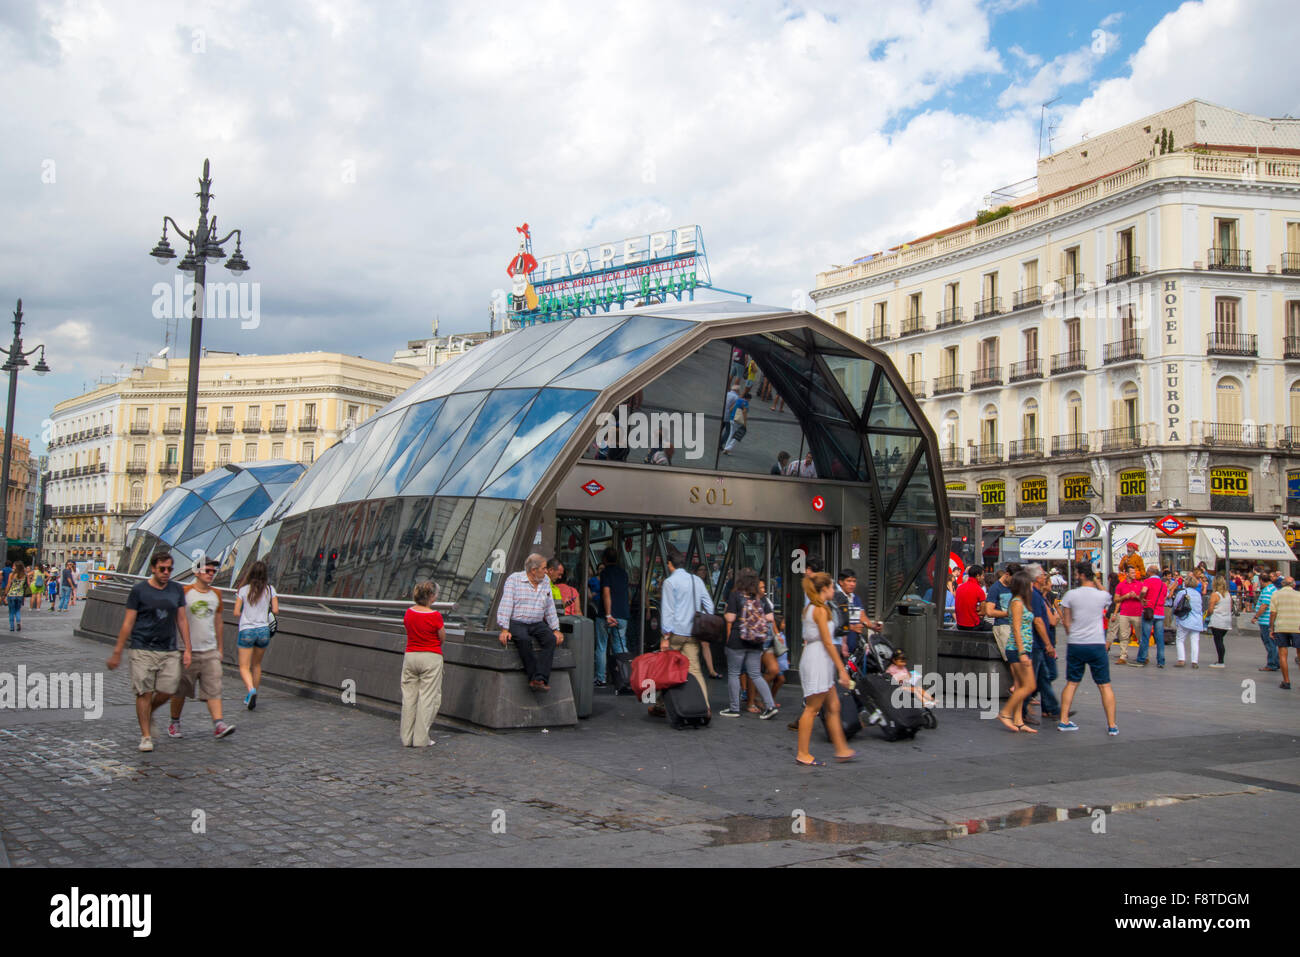 Cercanias station entrance and Tio Pepe neon sign on its new location. Puerta del Sol, Madrid, Spain. Stock Photo